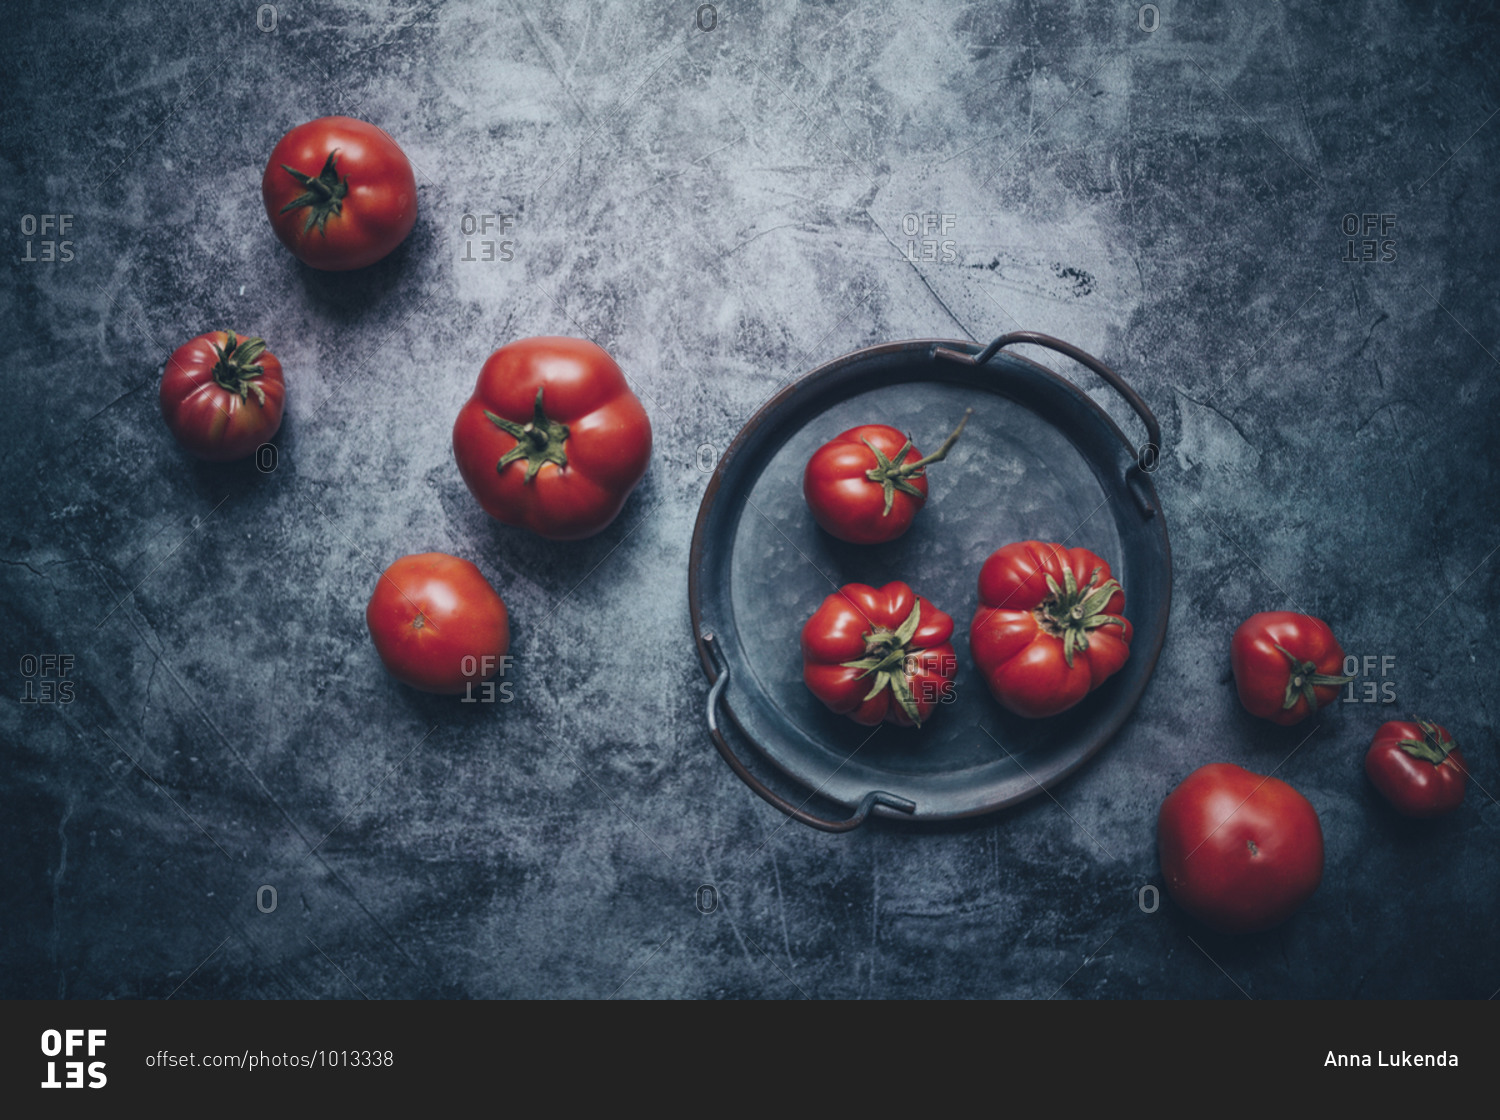 Overhead view of fresh tomatoes in a tray on dark gray concrete surface